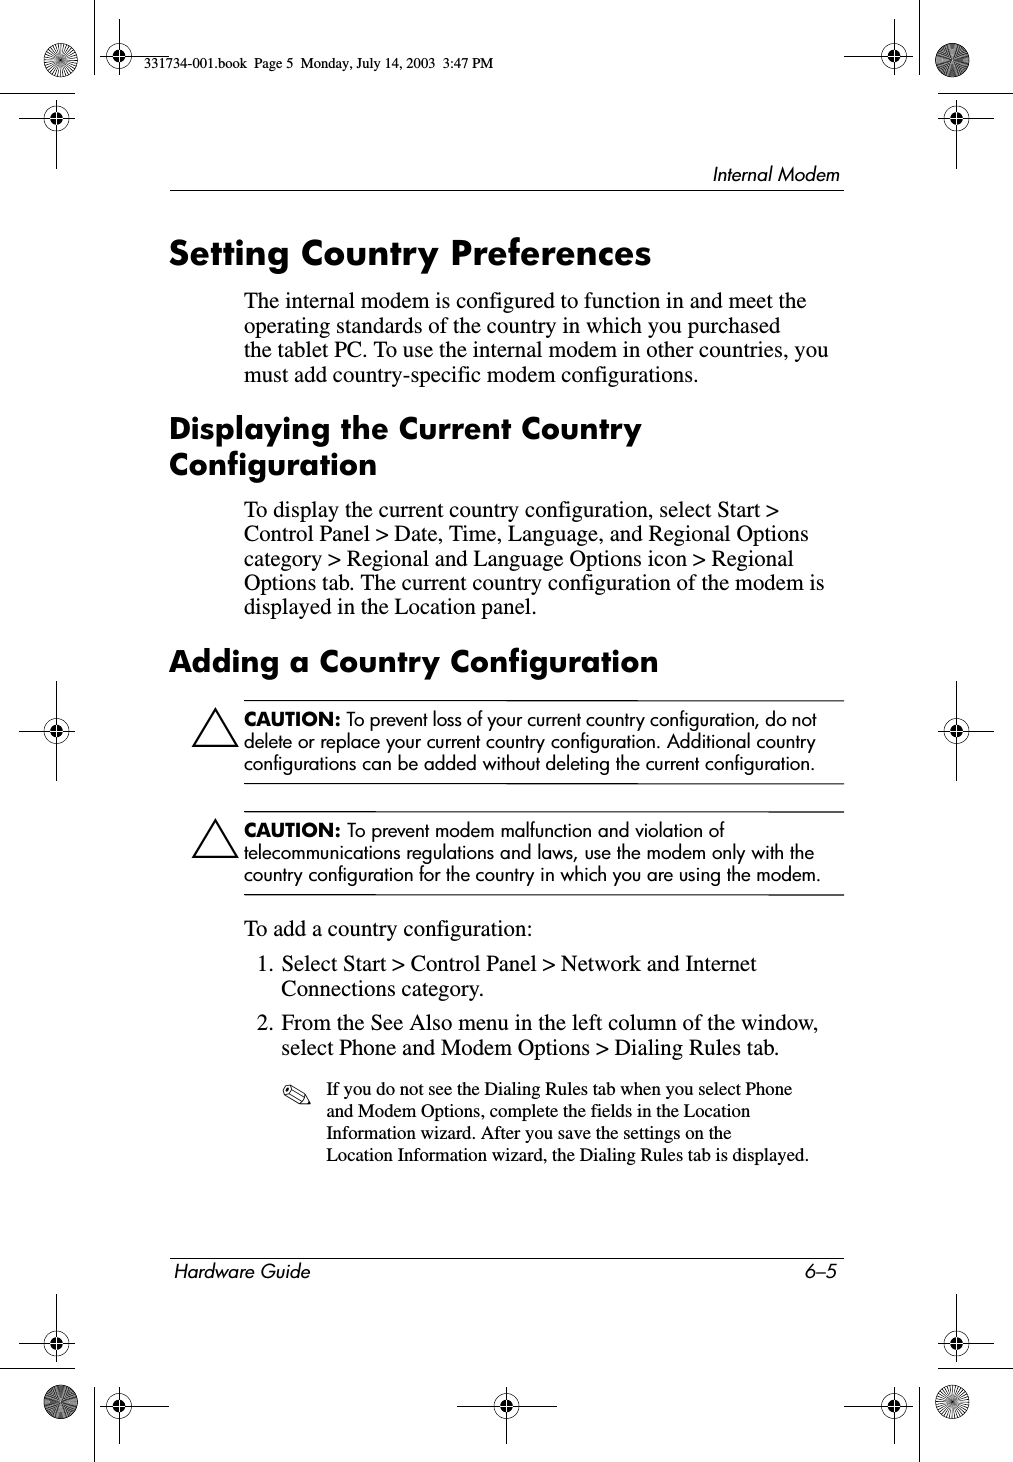 Internal ModemHardware Guide 6–5Setting Country PreferencesThe internal modem is configured to function in and meet the operating standards of the country in which you purchased the tablet PC. To use the internal modem in other countries, you must add country-specific modem configurations.Displaying the Current Country ConfigurationTo display the current country configuration, select Start &gt; Control Panel &gt; Date, Time, Language, and Regional Options category &gt; Regional and Language Options icon &gt; Regional Options tab. The current country configuration of the modem is displayed in the Location panel.Adding a Country ConfigurationÄCAUTION: To prevent loss of your current country configuration, do not delete or replace your current country configuration. Additional country configurations can be added without deleting the current configuration.ÄCAUTION: To prevent modem malfunction and violation of telecommunications regulations and laws, use the modem only with the country configuration for the country in which you are using the modem.To add a country configuration:1. Select Start &gt; Control Panel &gt; Network and Internet Connections category.2. From the See Also menu in the left column of the window, select Phone and Modem Options &gt; Dialing Rules tab.✎If you do not see the Dialing Rules tab when you select Phone and Modem Options, complete the fields in the Location Information wizard. After you save the settings on the Location Information wizard, the Dialing Rules tab is displayed.331734-001.book  Page 5  Monday, July 14, 2003  3:47 PM